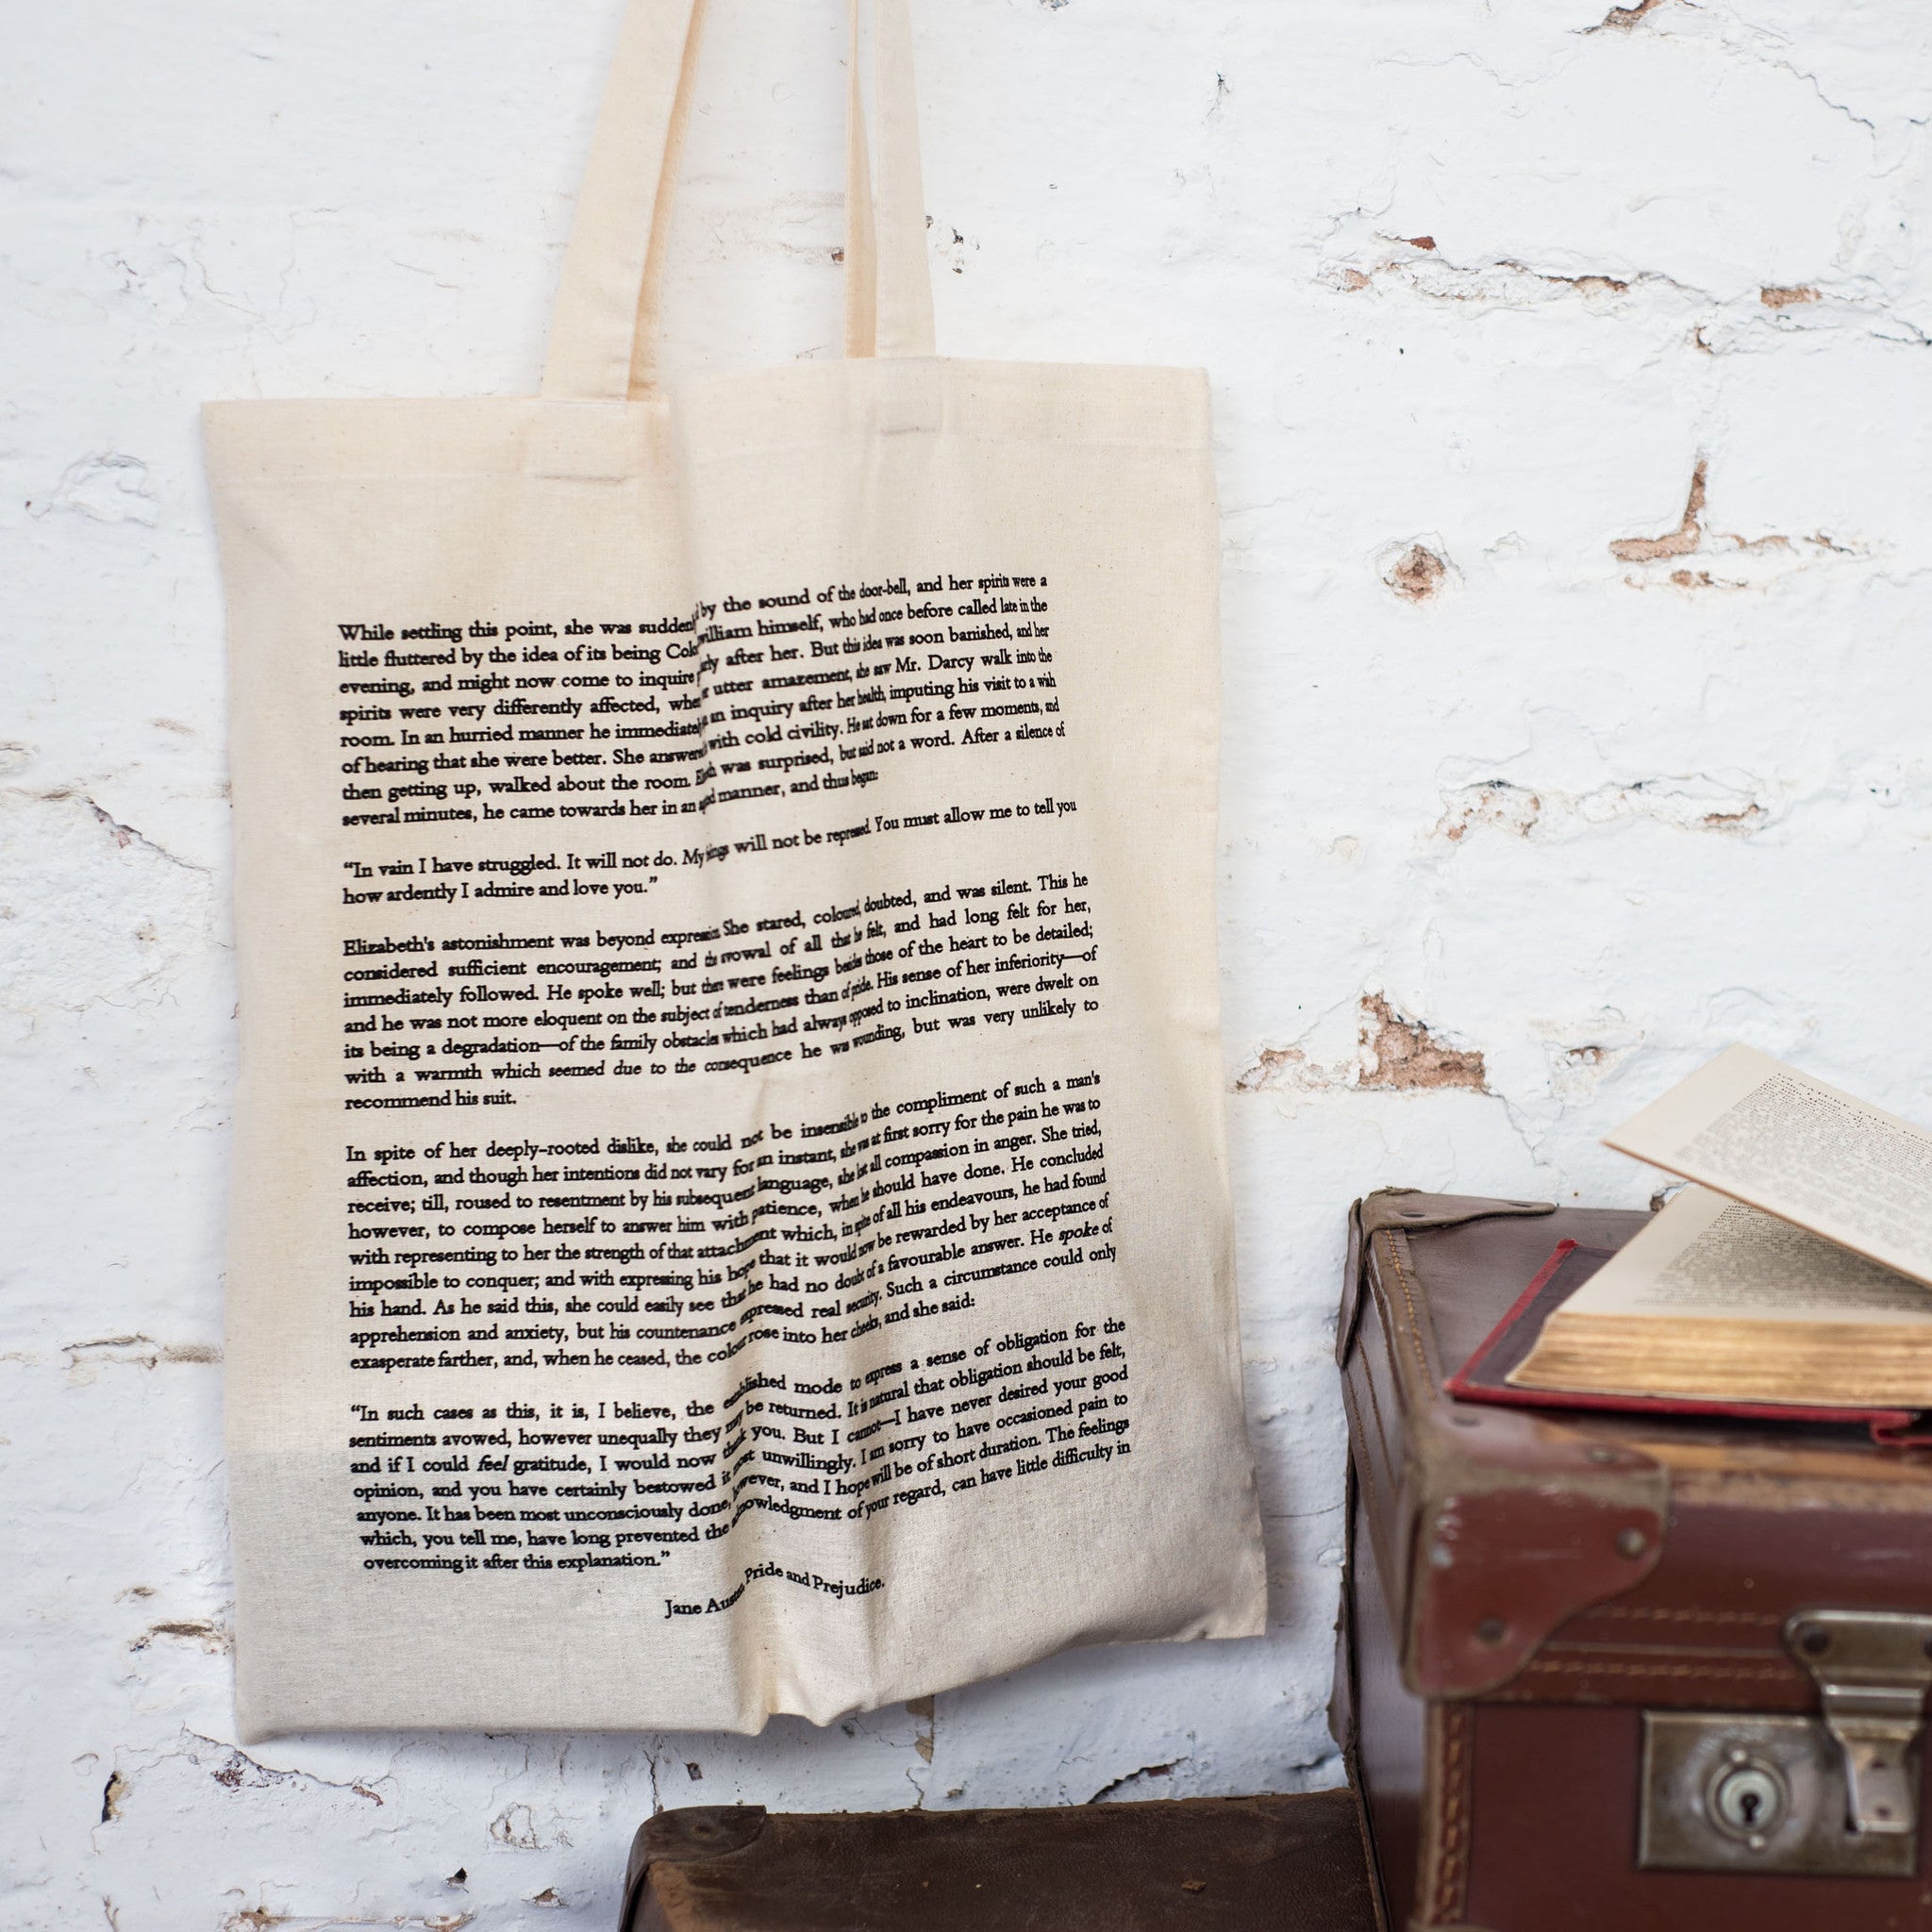 Pride and Prejudice by Jane Austen Tote Bag, Jane Austen Gift, Jane Austen  Pride and Prejudice Bag, Classic Book Literary Gift, Bookish Gift (Standard